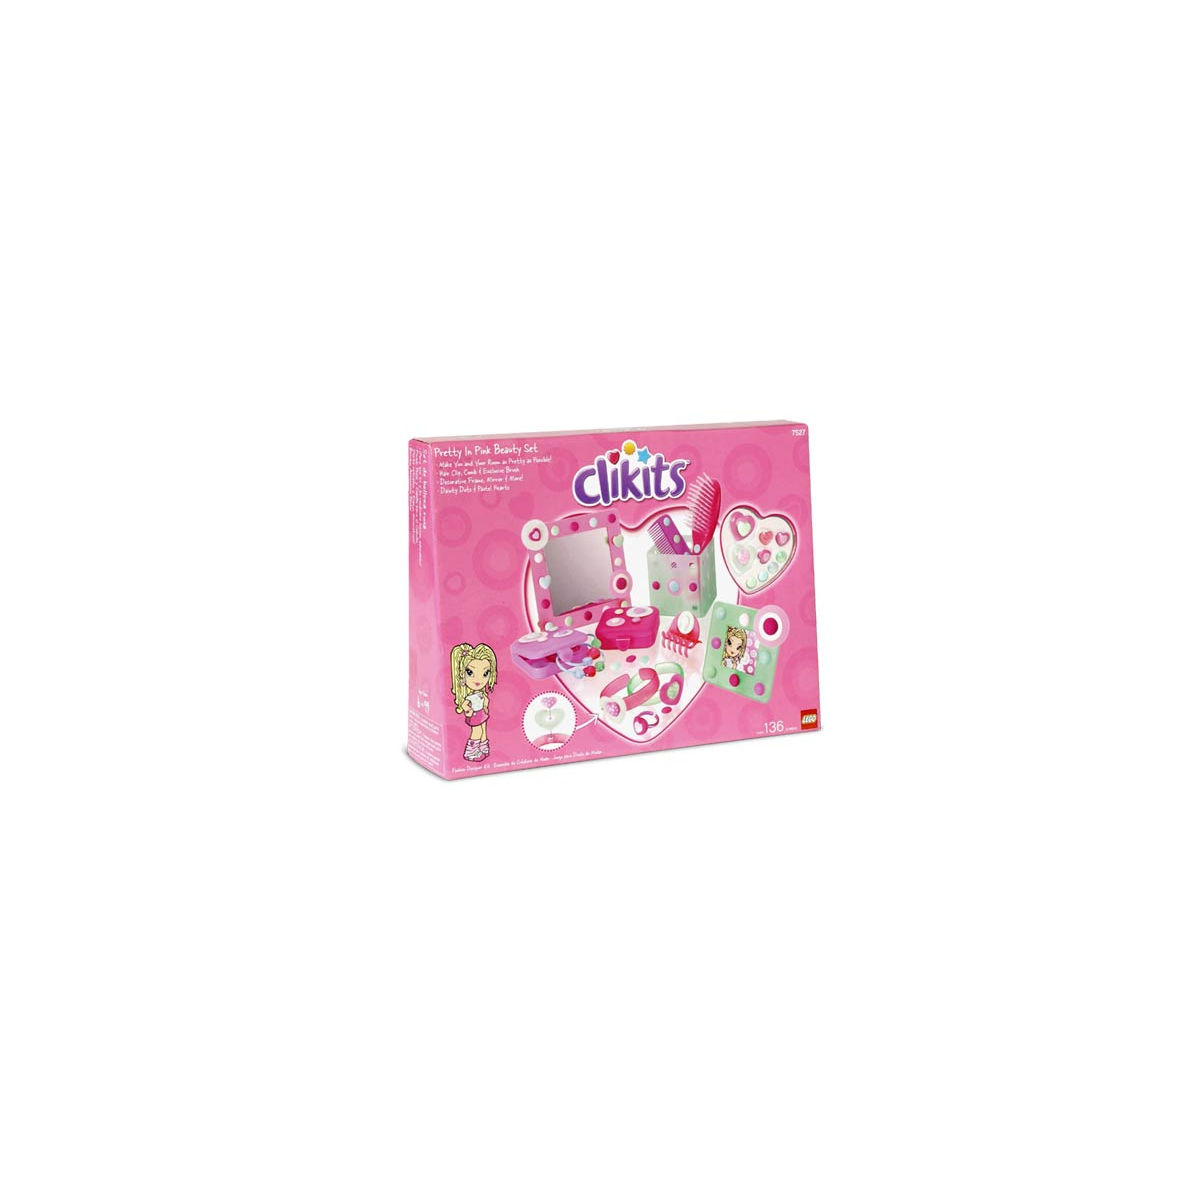 LEGO Clikits Pretty In Pink Beauty Set - 7527